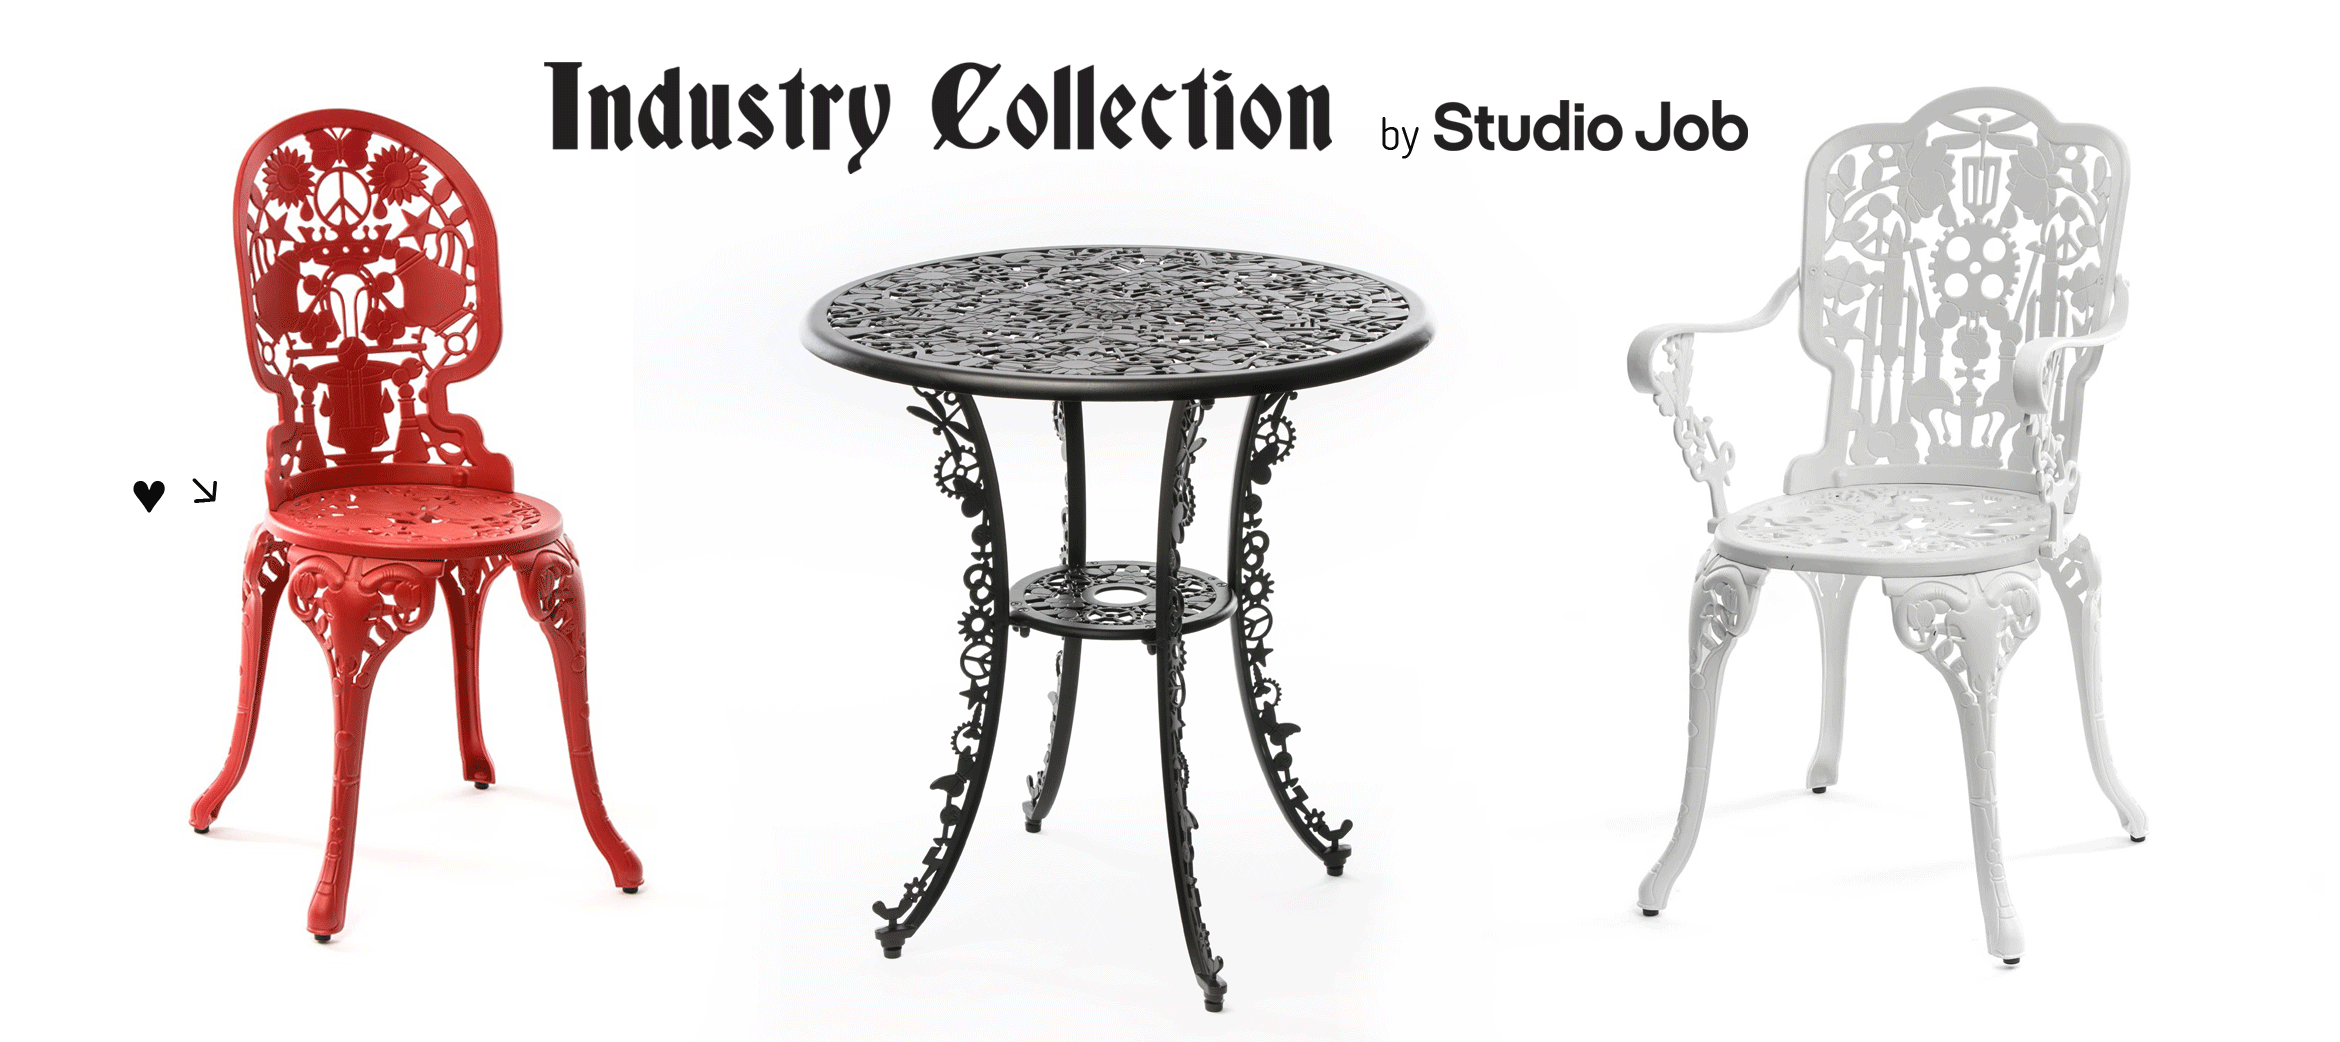 Industry Collection